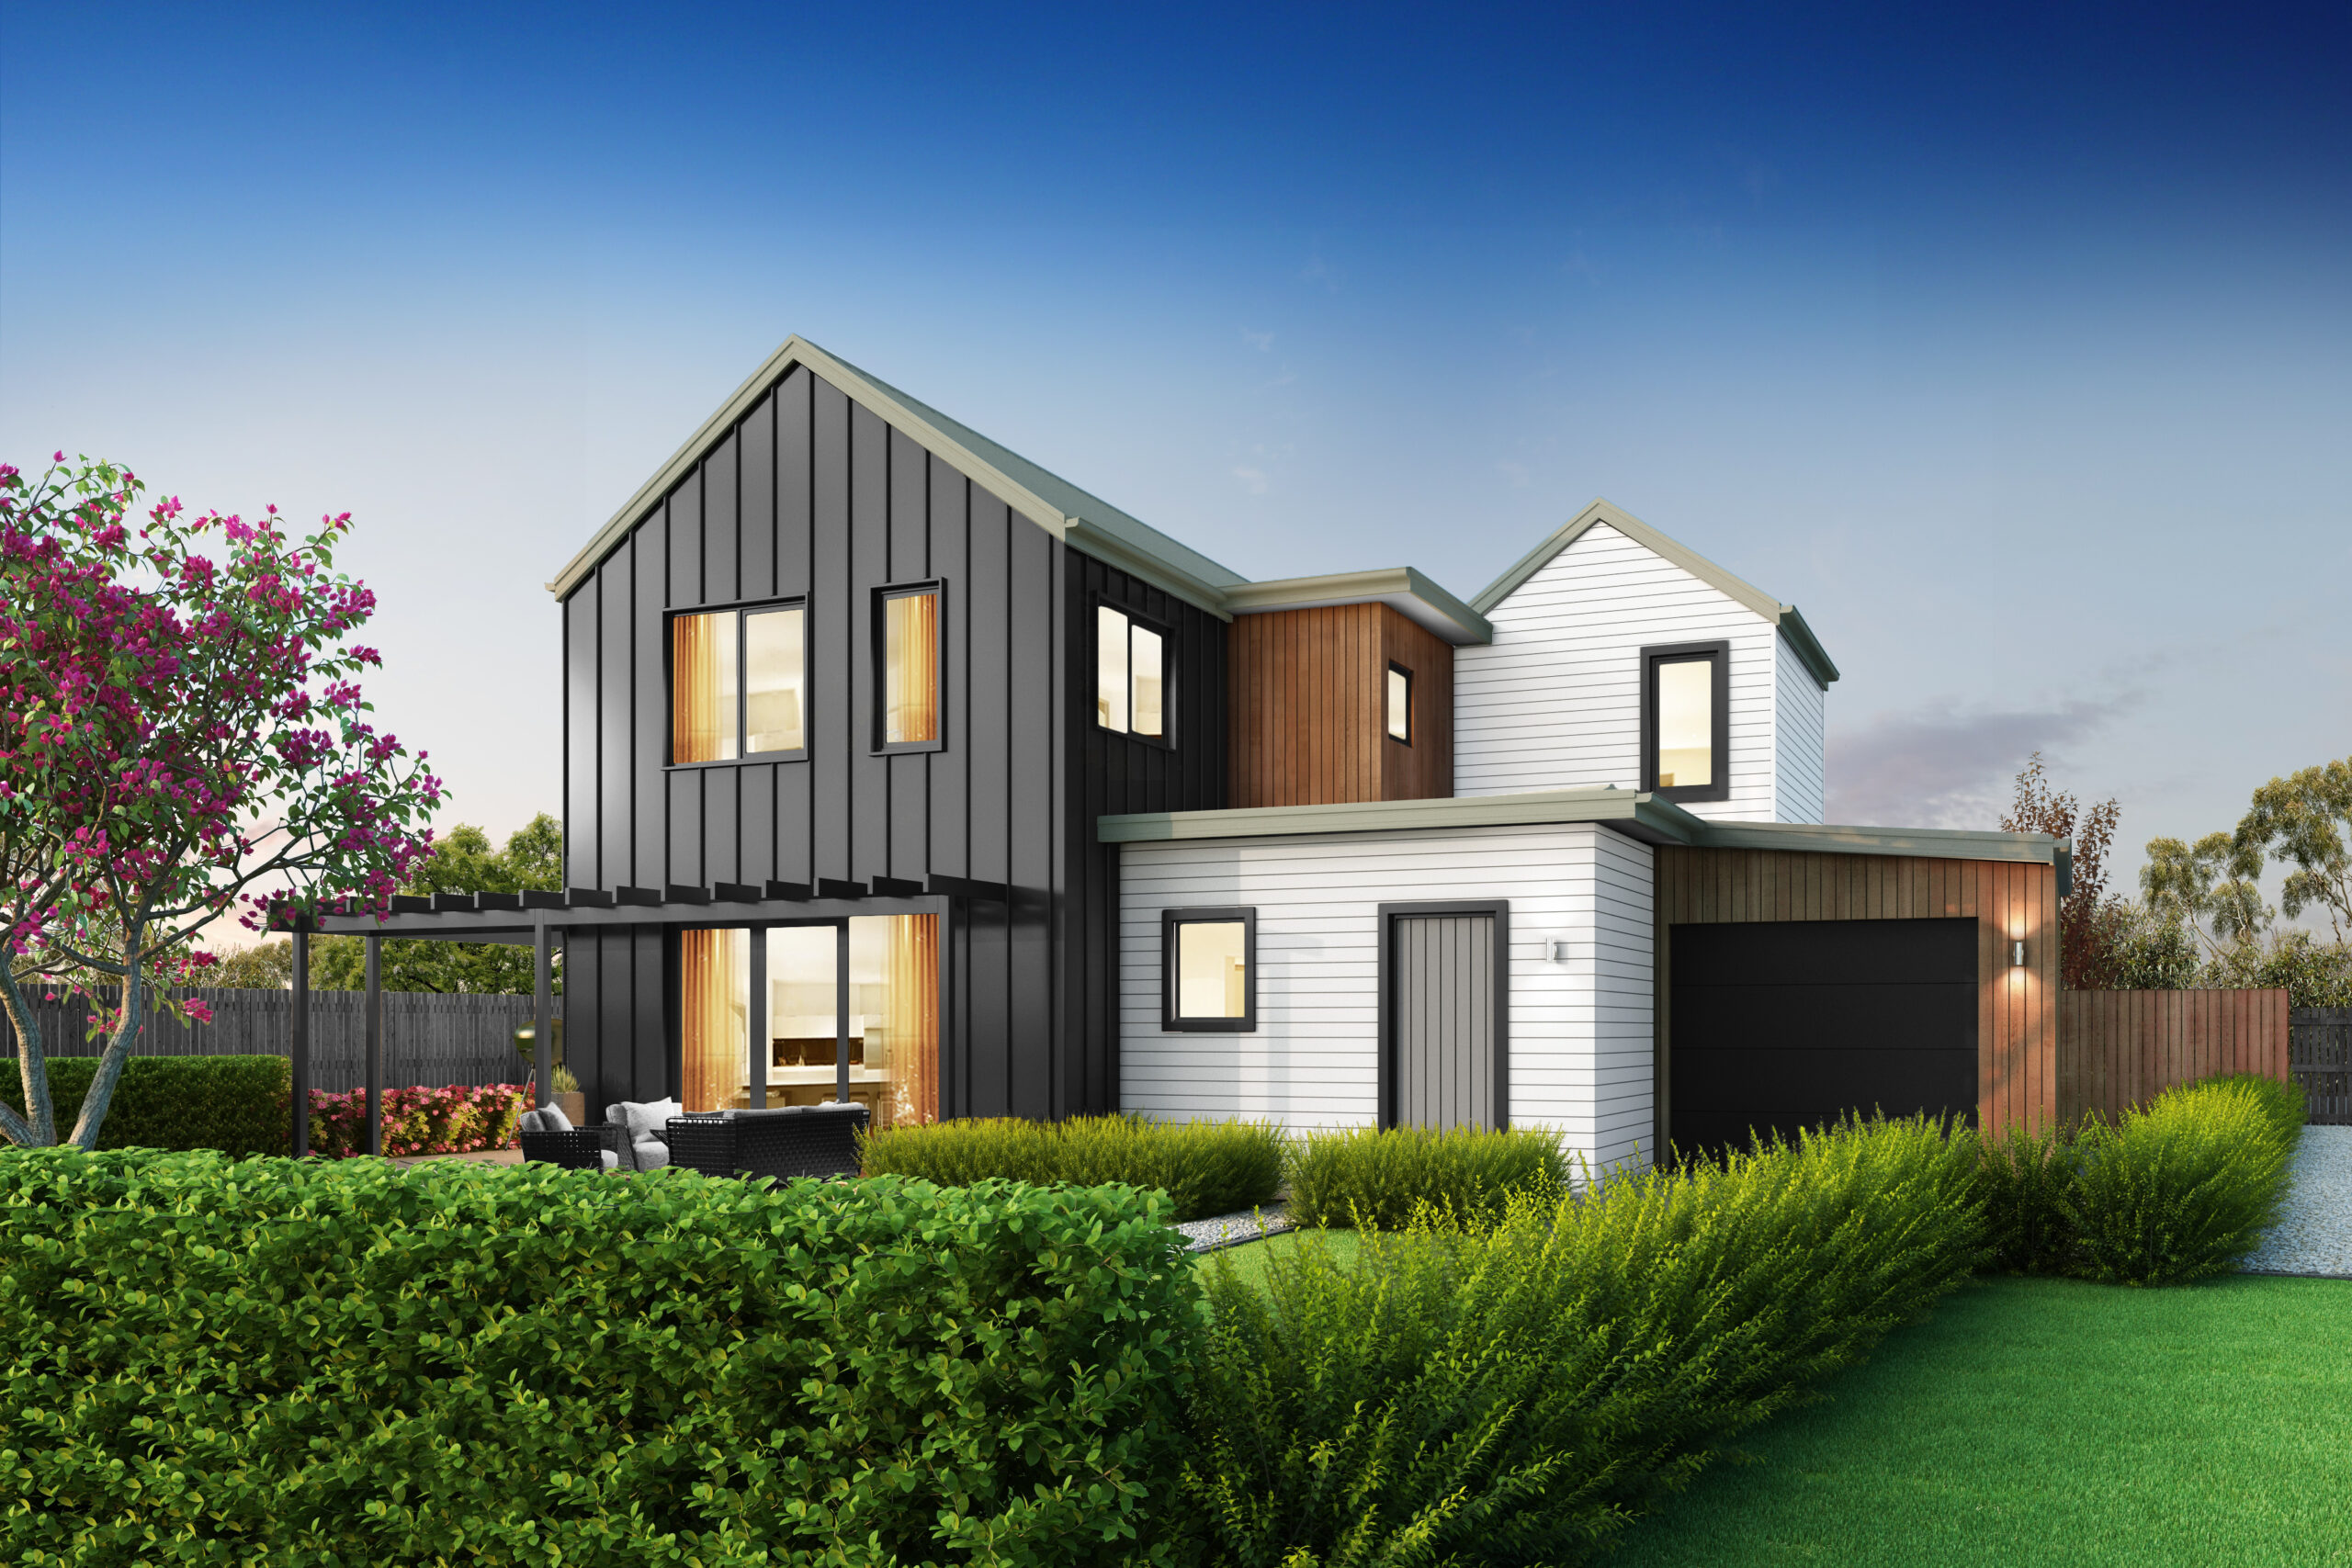 new build homes like the one featured at paerata rise are selling fast